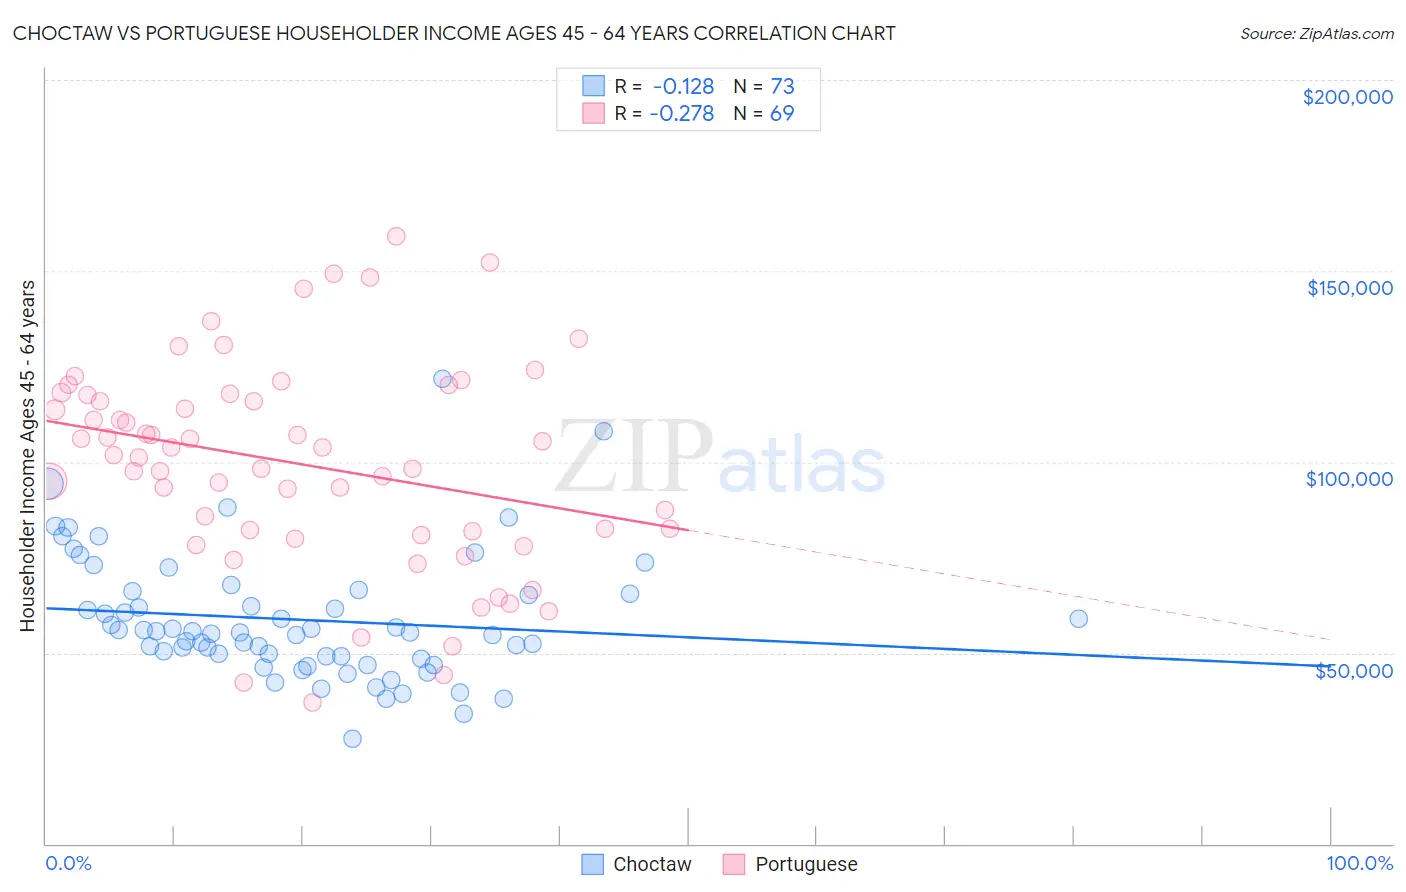 Choctaw vs Portuguese Householder Income Ages 45 - 64 years